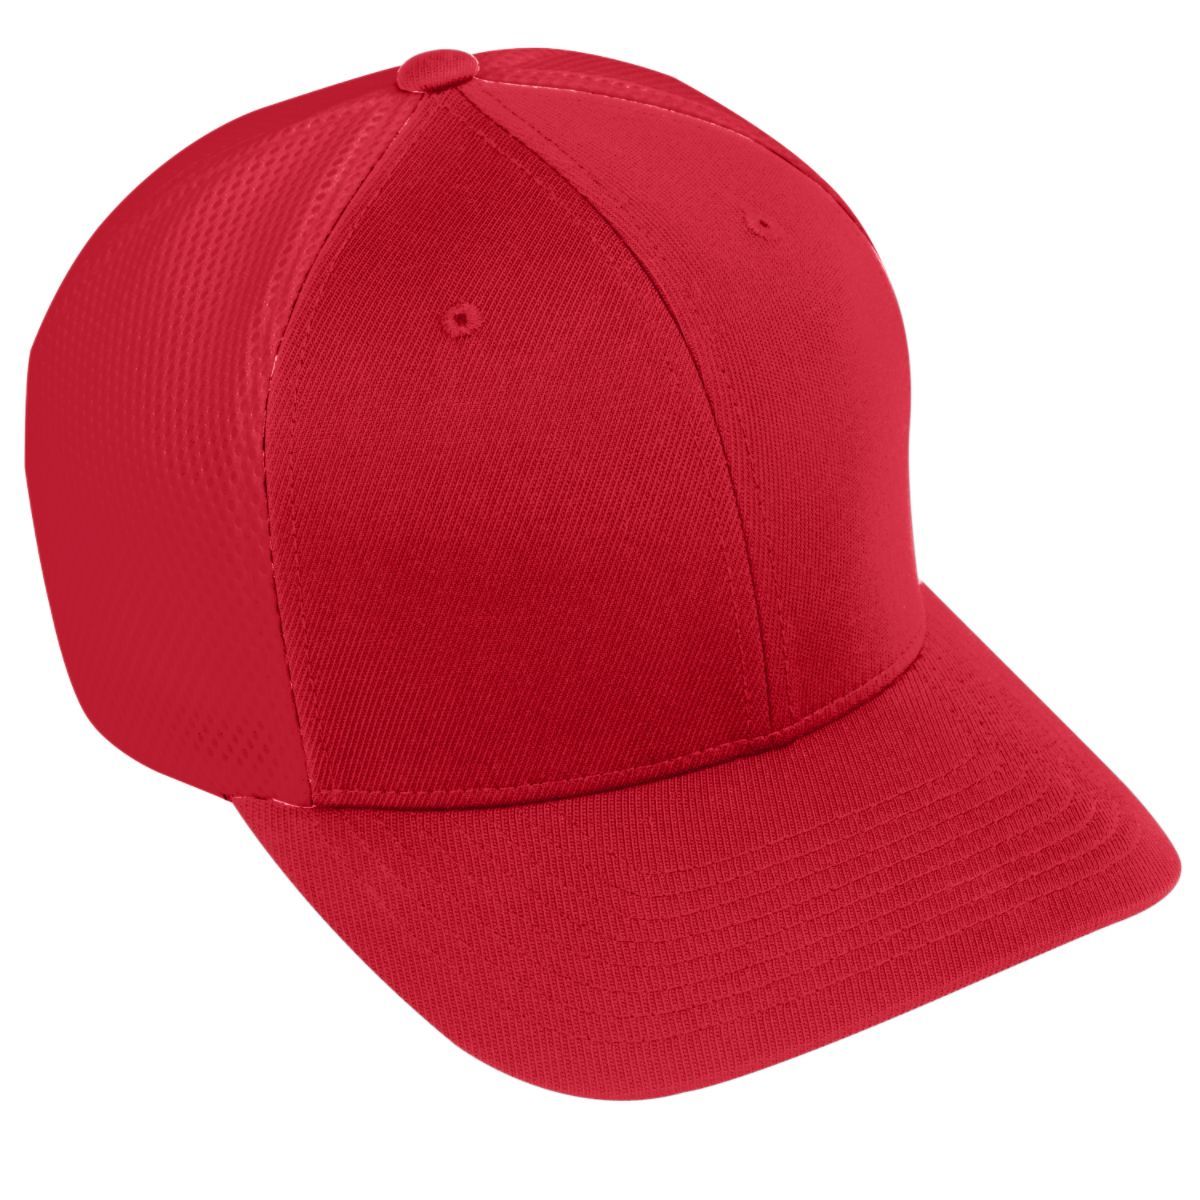 Augusta Sportswear Flexfit Vapor Cap in Red/Red  -Part of the Adult, Augusta-Products, Headwear, Headwear-Cap product lines at KanaleyCreations.com